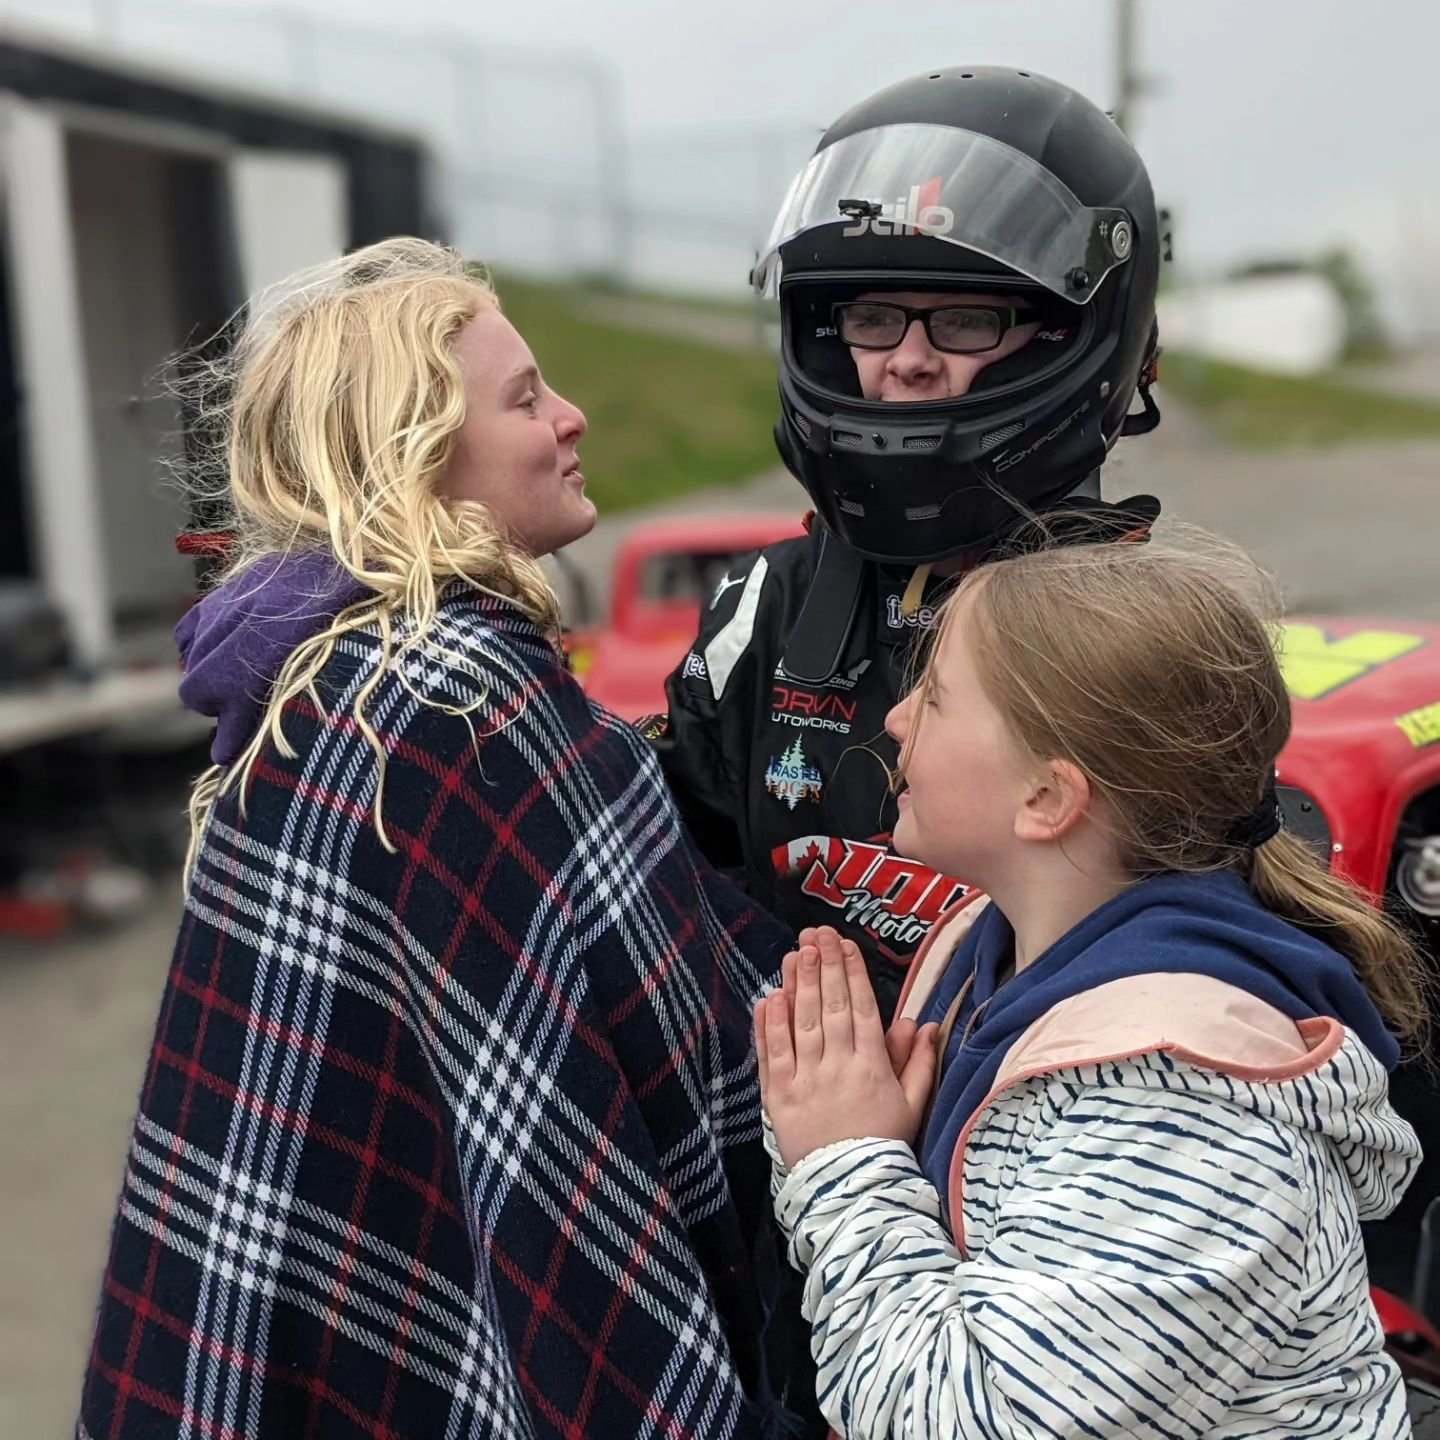 Today was a fantastic day for our whole family at the track!  My sister's were supporting me in the pits which was awesome, and they also had some big news of their own... Along with some other amazing young workers, they are now officially helping o